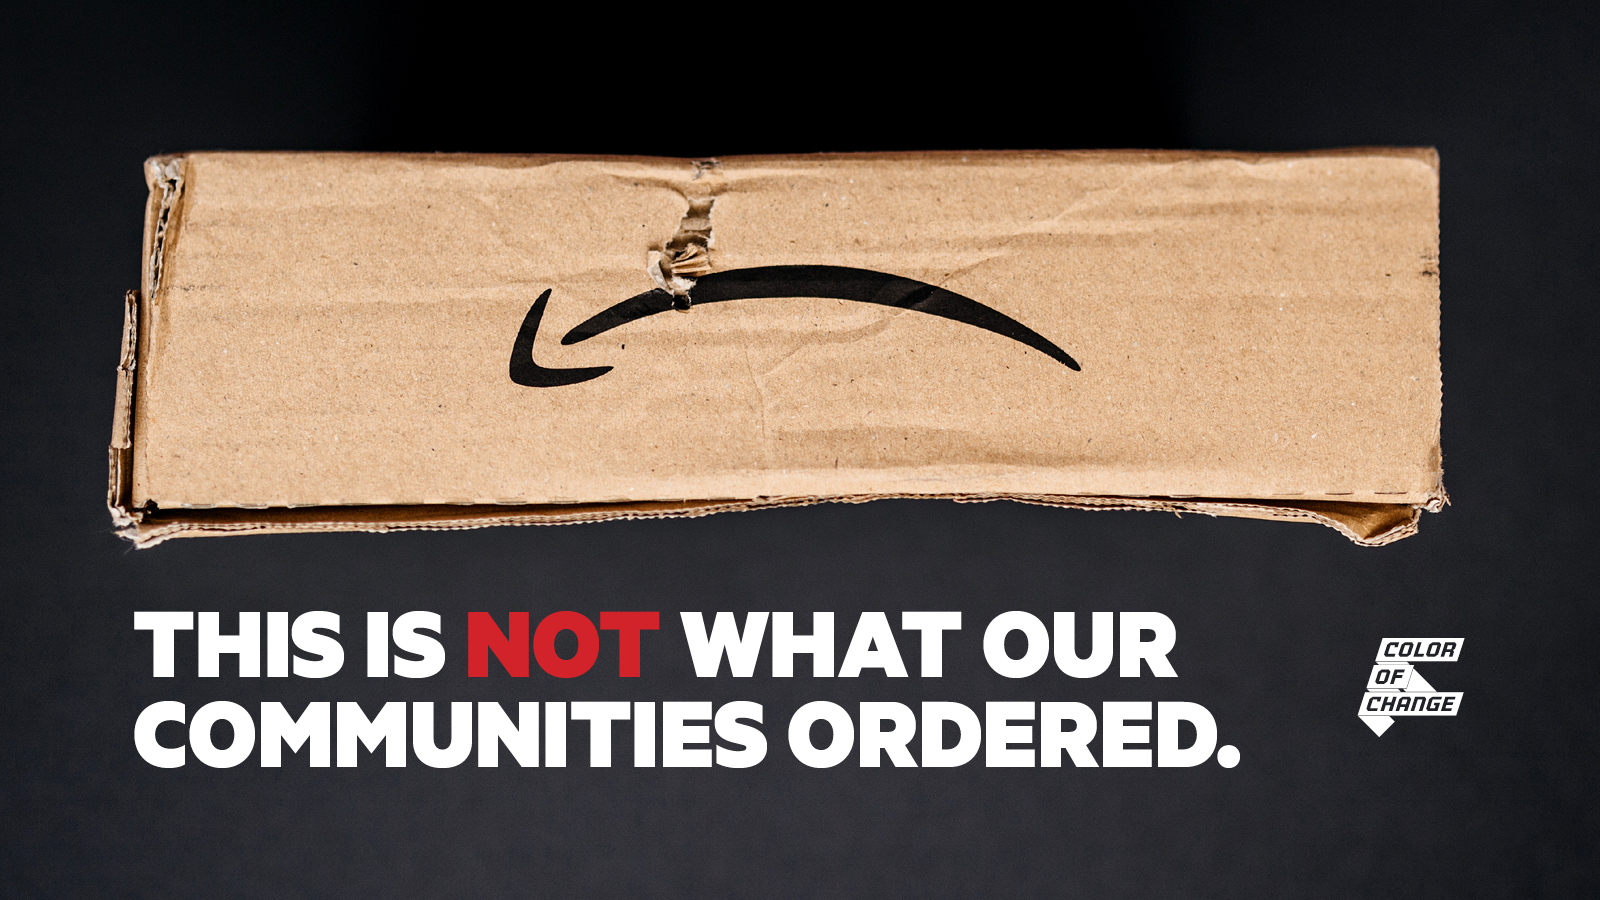 An image of a damaged package with the Amazon logo upside down so it looks like a frown. The text reads "This is not what our communities ordered." The Color Of Change logo is in the top right.